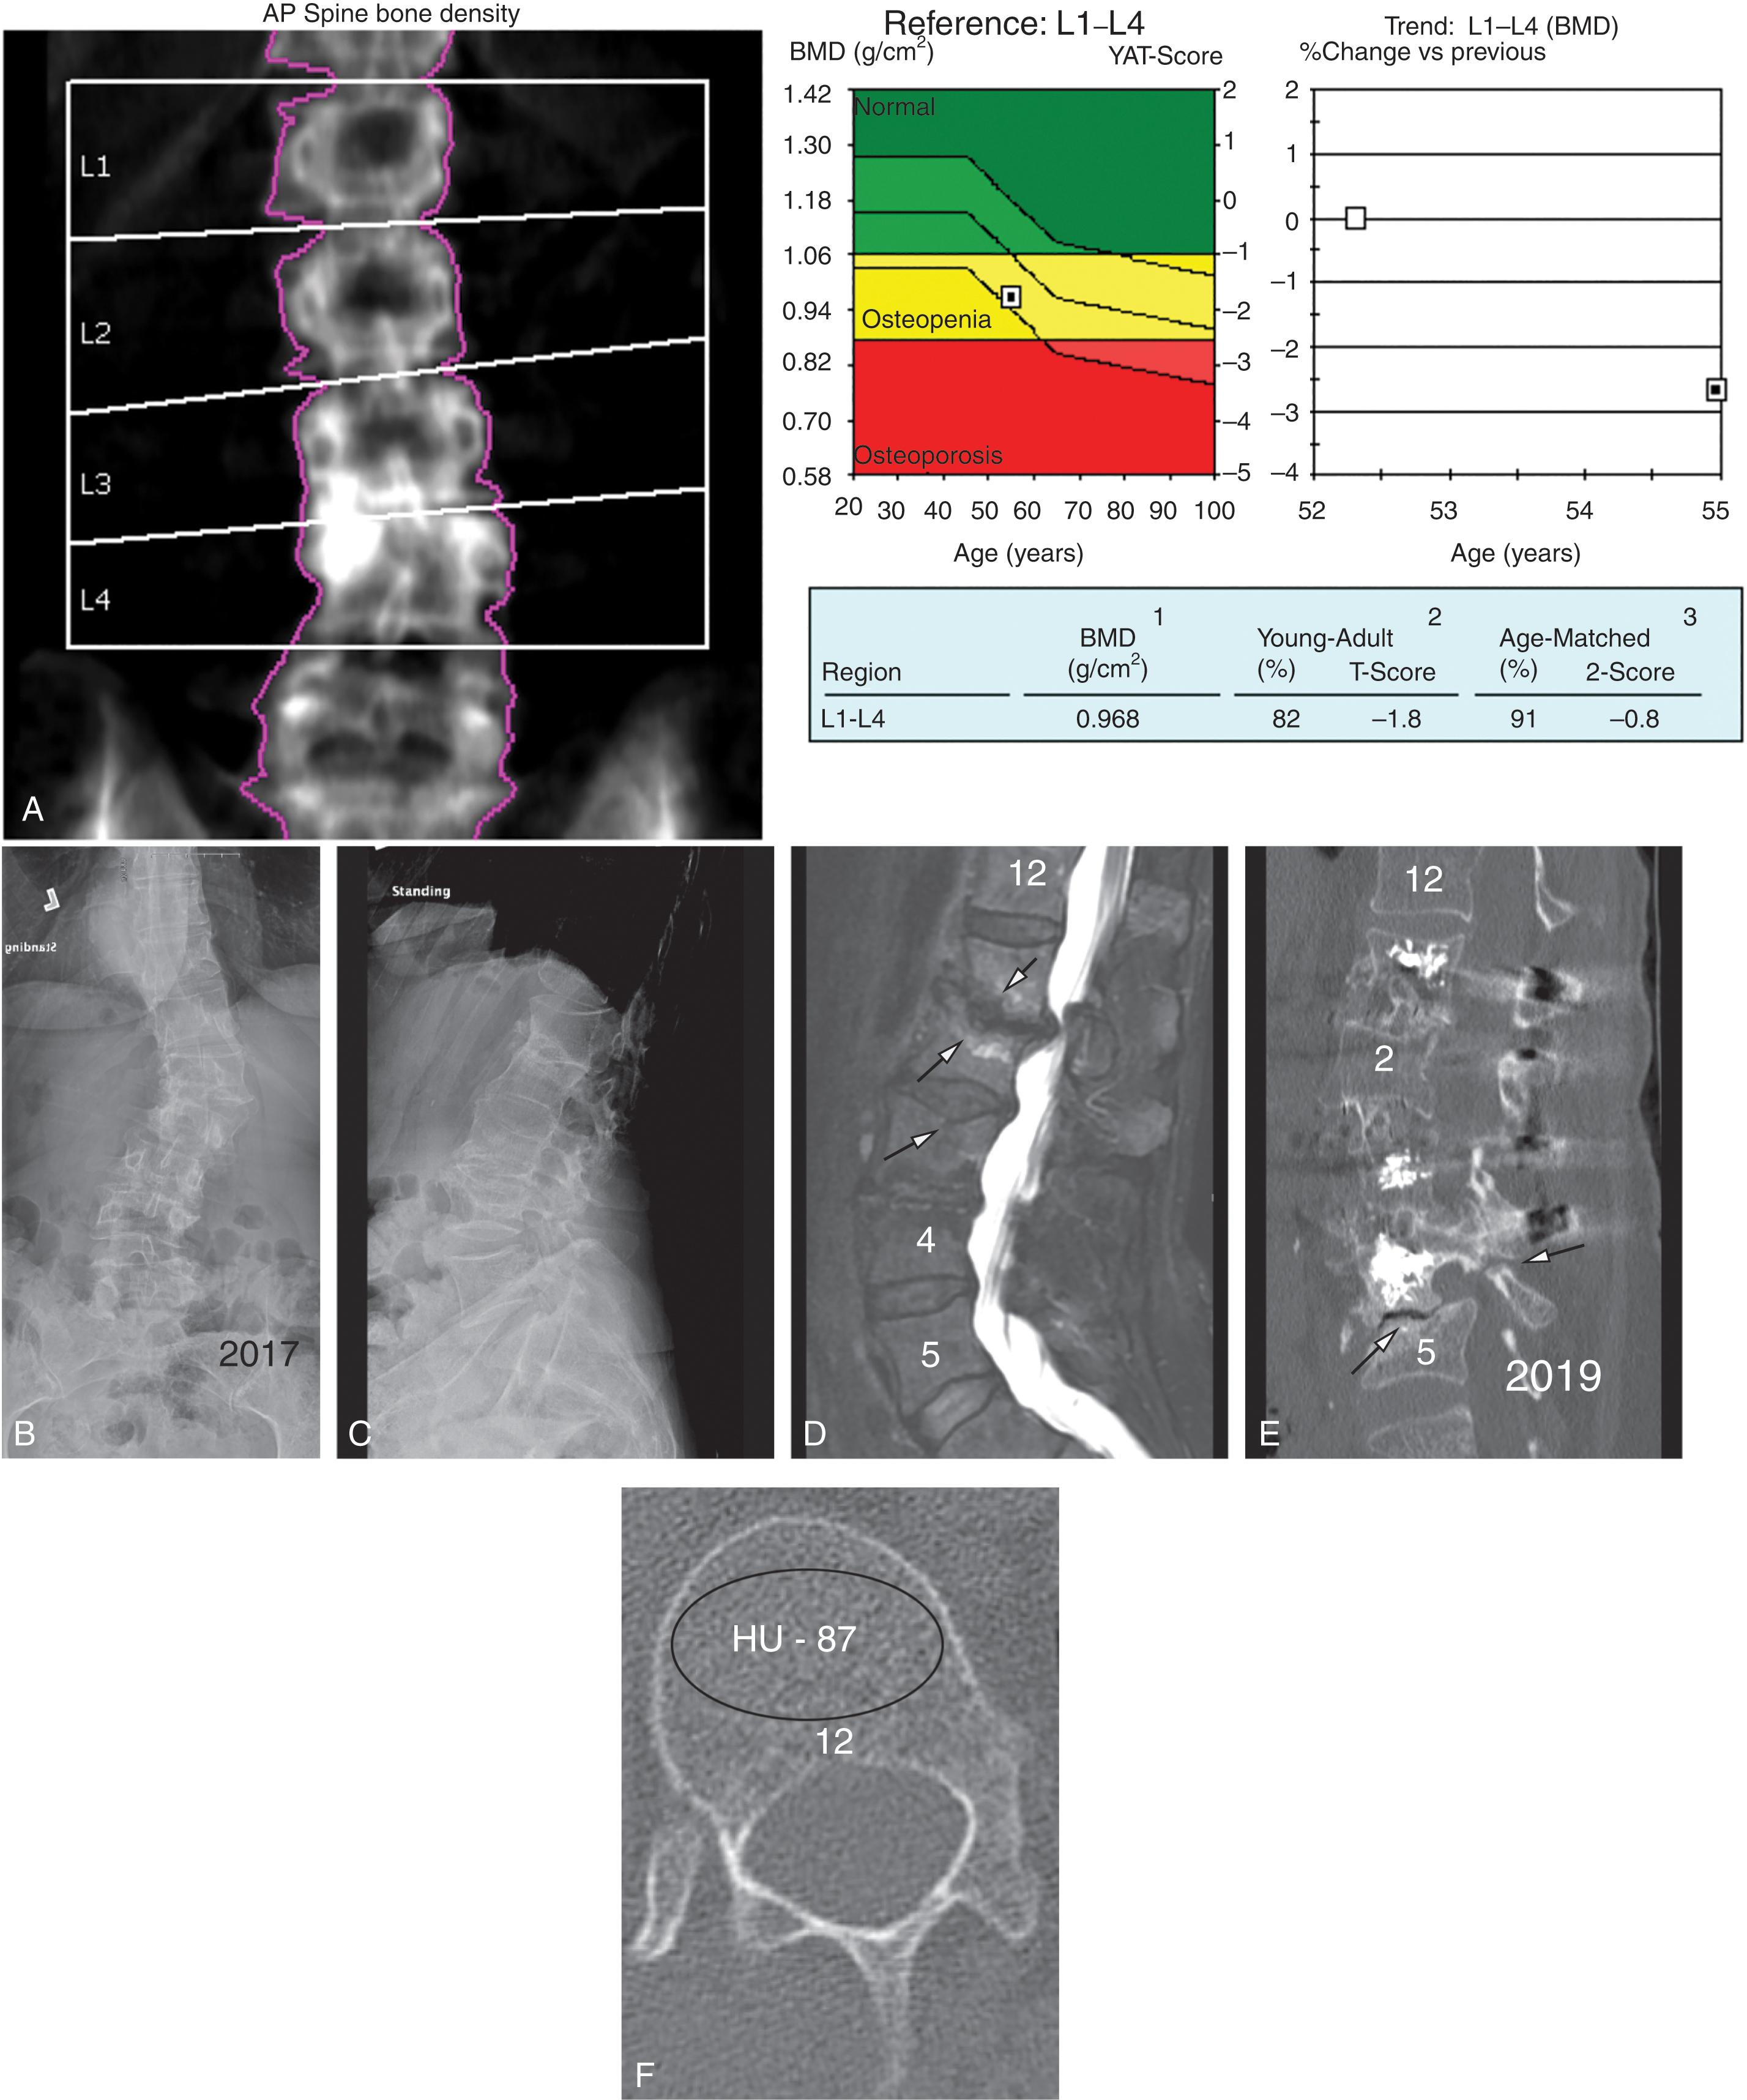 Fig. 2.2, (A) In 2009, a 55-year-old steroid-dependent female with Sjögren syndrome underwent a dual energy x-ray absorptiometry scan of the lumbar spine. The diagnosis was osteopenia based on a T-score of –1.8. This was incorrectly interpreted since the degenerative changes at L3–L4 should not have been included in the measurement. The report at L1–L2, where the degenerative changes were eliminated, had a T-score of –3.3 indicating osteoporosis. A small degree of scoliosis was noted and was centered at L3–L4. She was prescribed a course of alendronate and 24 months of teriparatide. (B) She presented in 2017 with pain, progressive scoliosis, and height loss. An anteroposterior (AP) radiograph shows 27 degrees scoliosis with apex at L1–L2. (C) Lateral image showing severe disc collapse at L1–L2 and concave superior endplates of L3 and L4 suggesting osteoporosis fractures. (D) Sagittal T2 magnetic resonance image showing stenosis at L1–L2 with severe collapse of disc space. The arrow points out erosion or fracture of the vertebral endplates of L1, L2, and L3. (E) The patient was treated with L1–L4 lateral interbody fusions with cages and allograft and posterior instrumentation with cemented pedicle screws. She did well for 4 months and presented with increasing pain and an inability to walk. Sagittal computed tomography (CT) showed pars fracture of L4, spondylolisthesis of L4–L5, and fracture of the superior endplate of L5. Dual energy x-ray absorptiometry was performed showing osteopenia of the right hip. However, her fracture risk assessment tool scores were 3.2% and 40.5% for 10-year hip and major osteoporotic fracture risk, respectively, indicating severe osteoporosis. (F) Axial CT of T12 with Hounsfield units of 87, indicating osteoporosis.